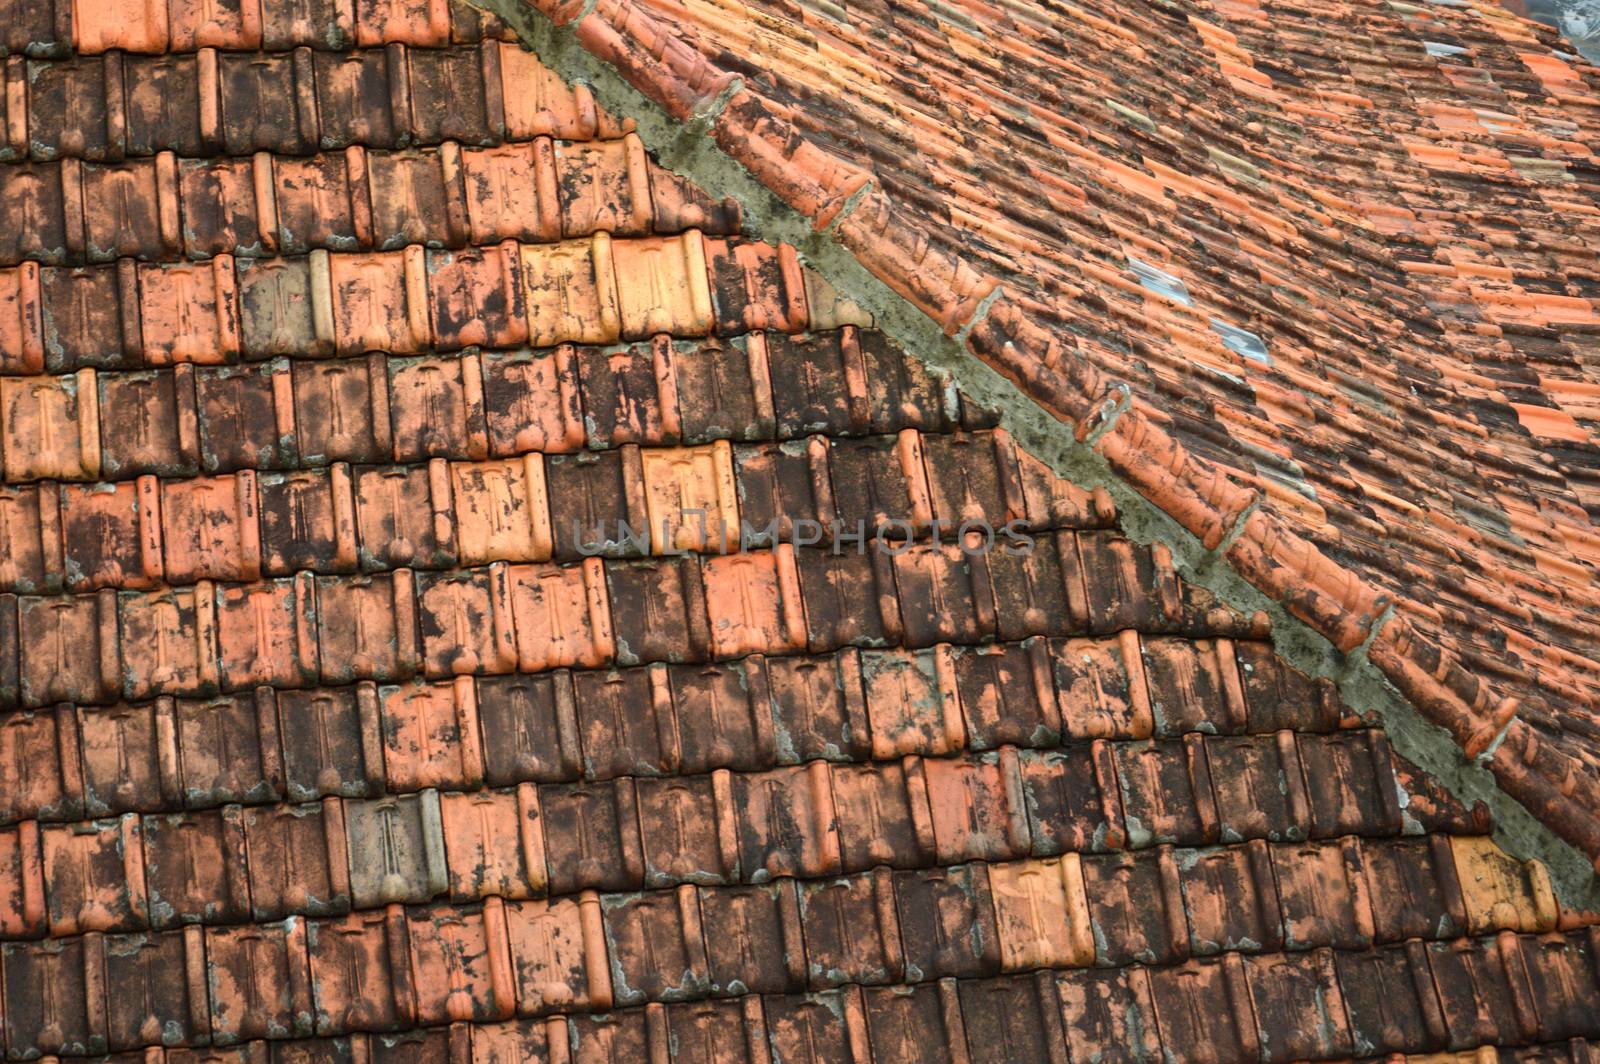 pattern and texture of  roof tiles